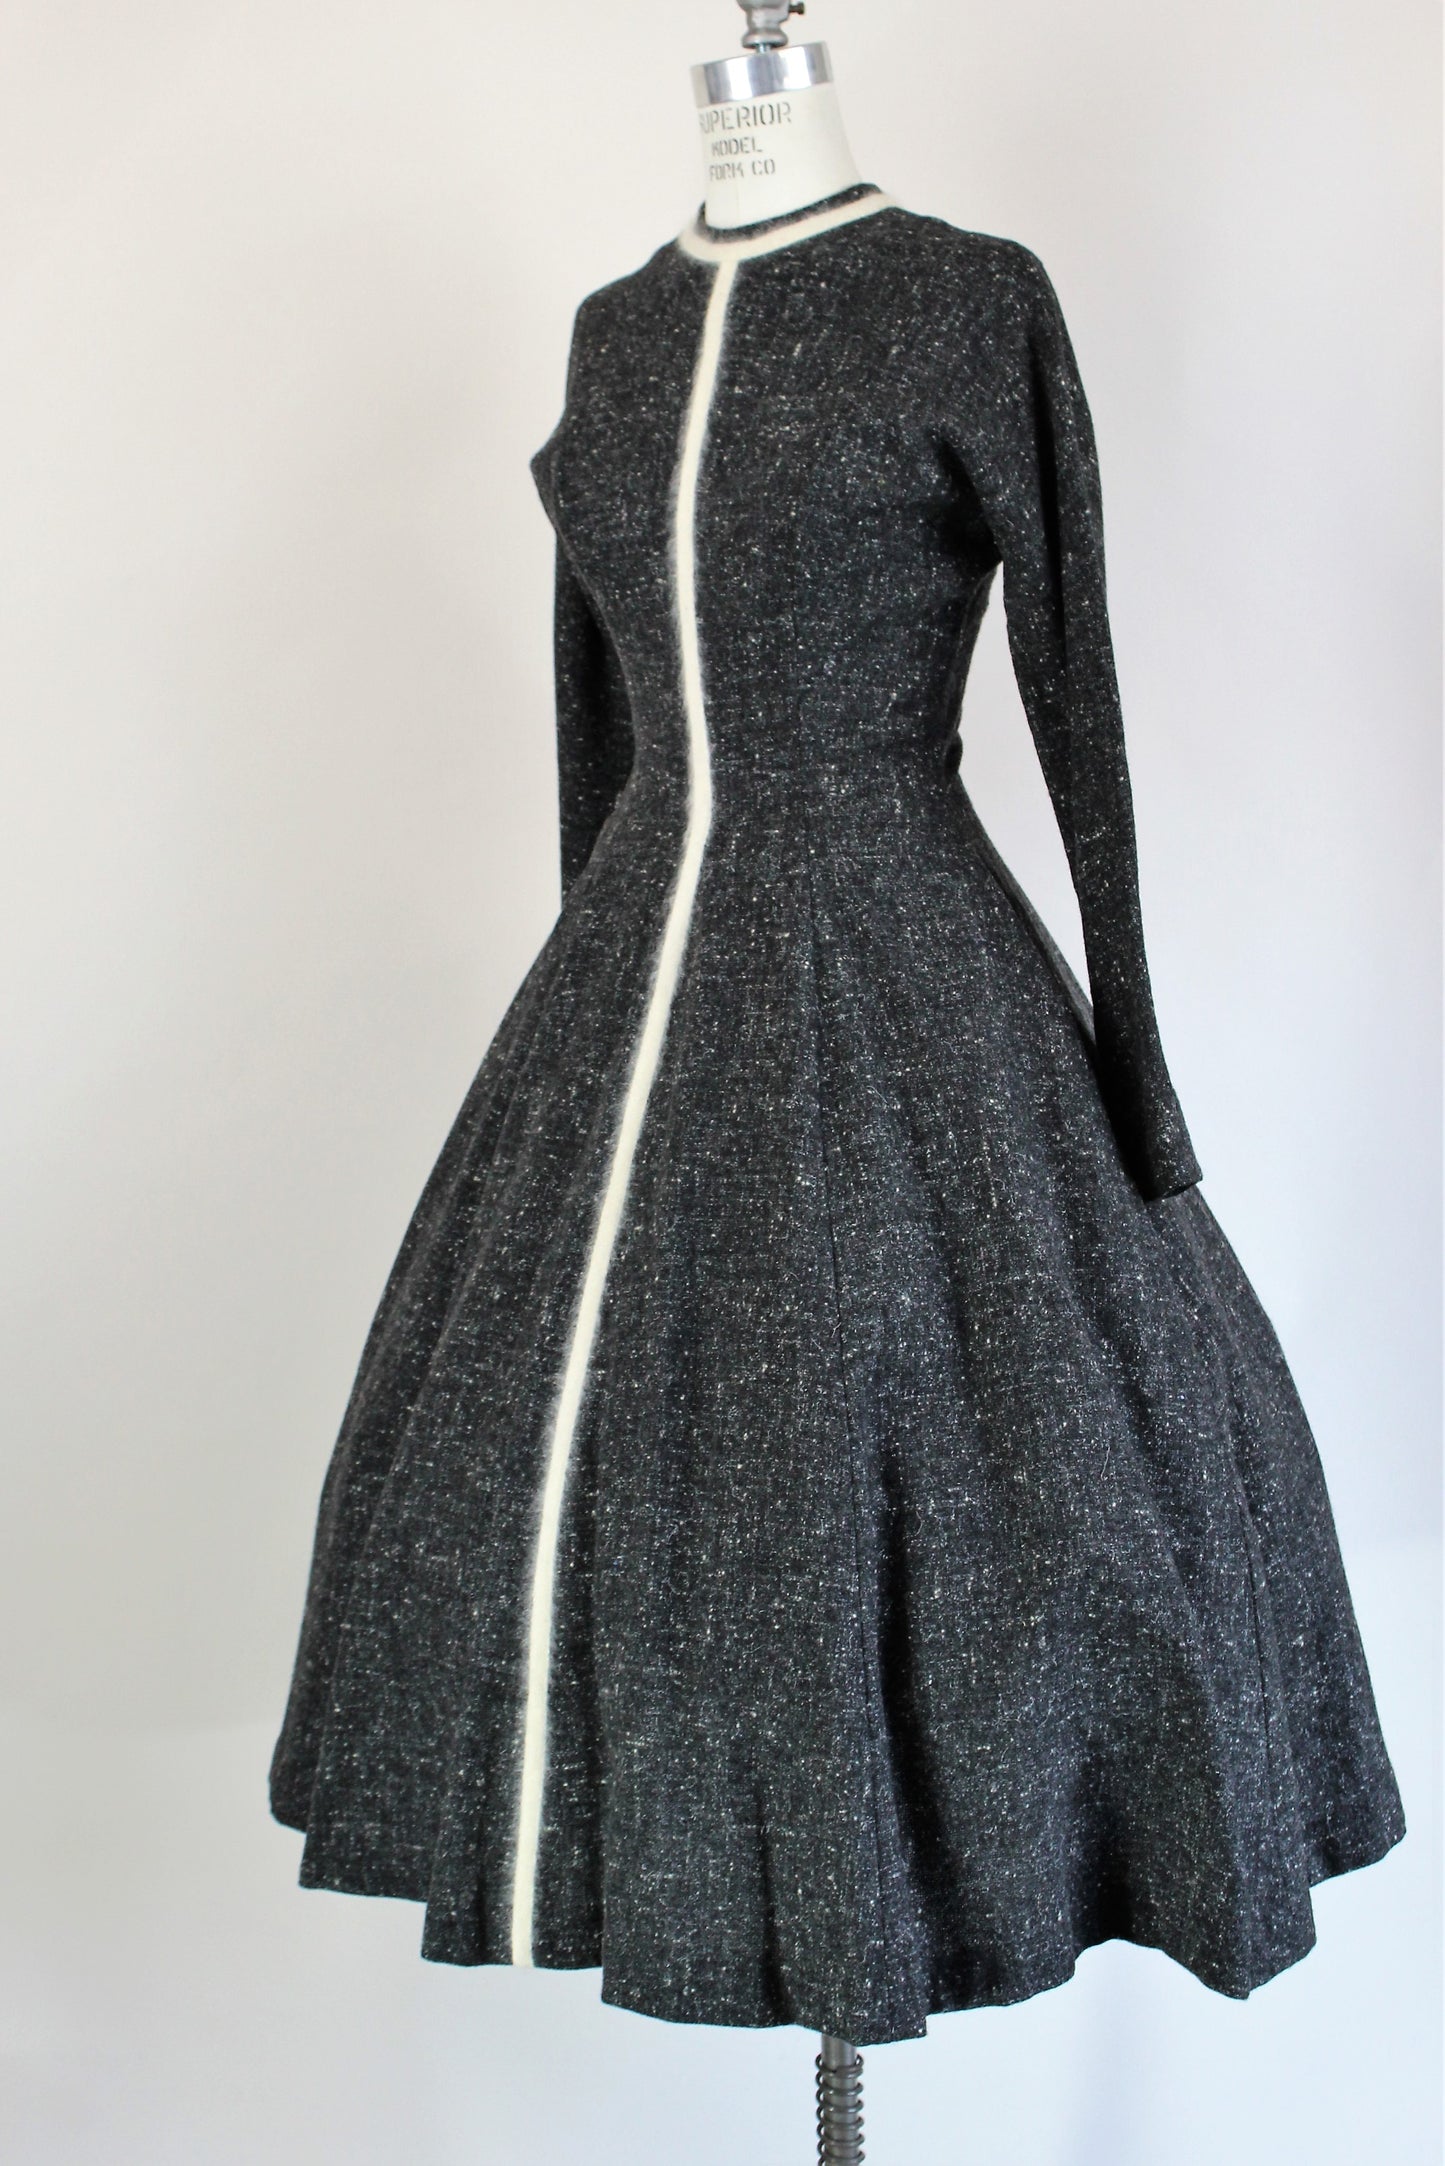 Vintage 1950s Beldon Cann New Look Gray Tweed Dress With Pockets And Angora Trim